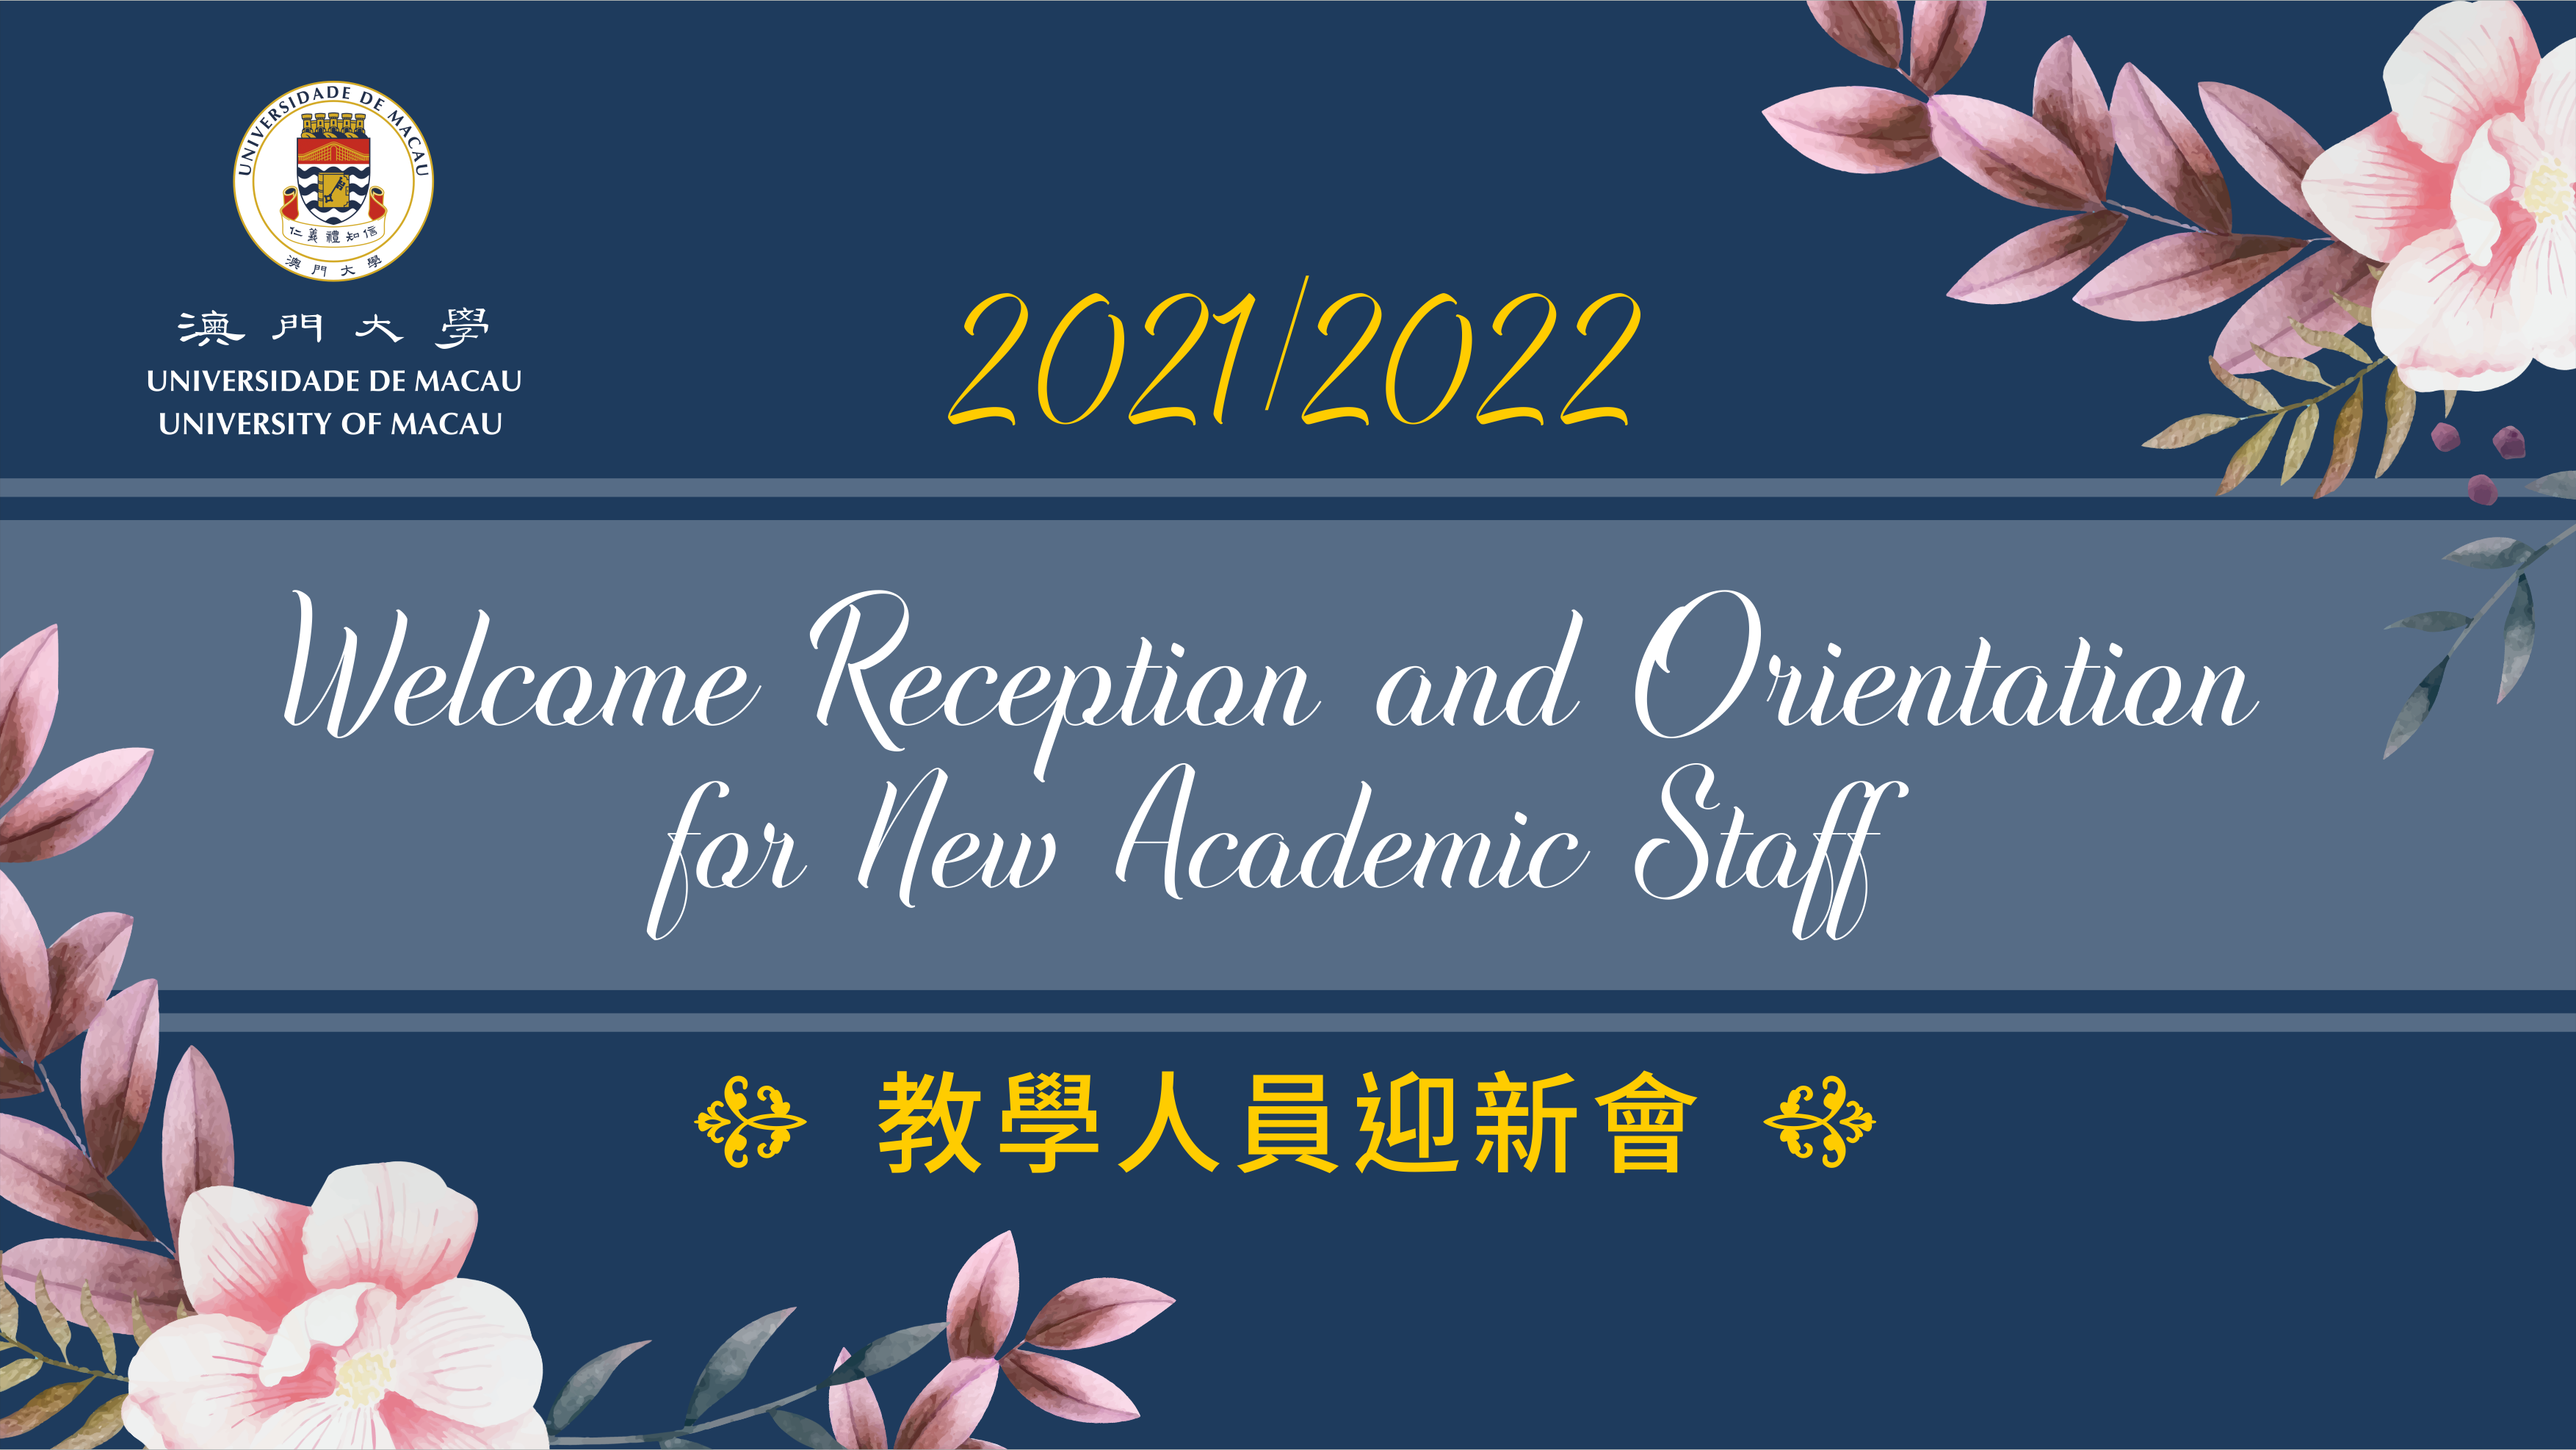 Welcome Reception And Orientation For New Academic Staff 2021/2022 | University Of Macau